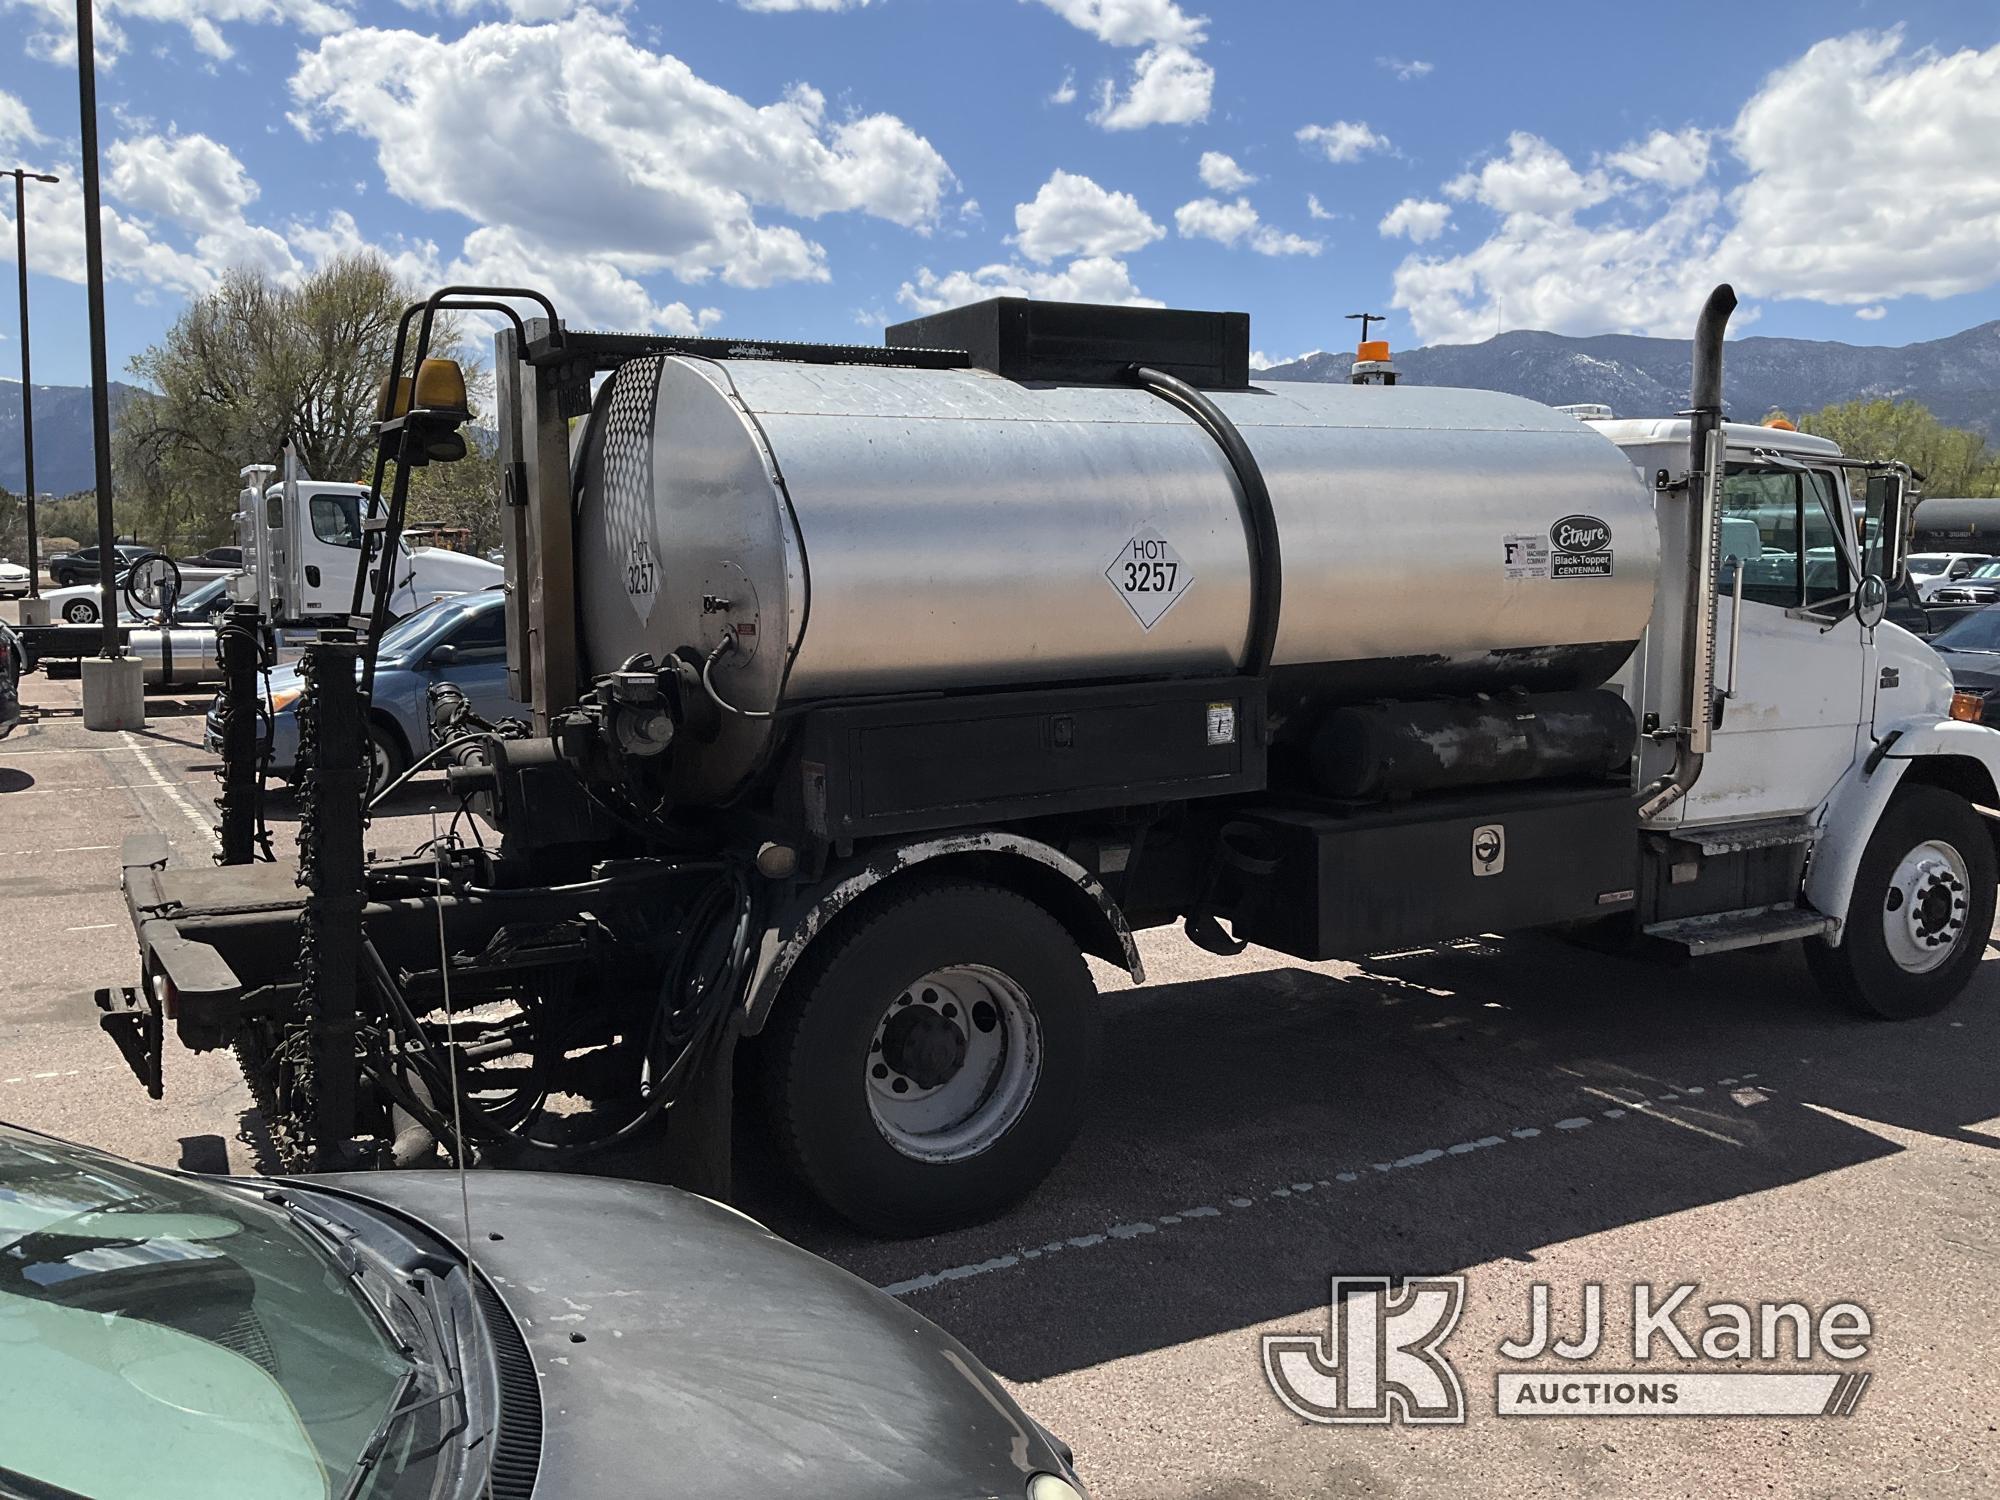 (Castle Rock, CO) 1999 Freightliner FL70 Flatbed/Tank Truck Runs, Moves & Operates.) (Seller States: